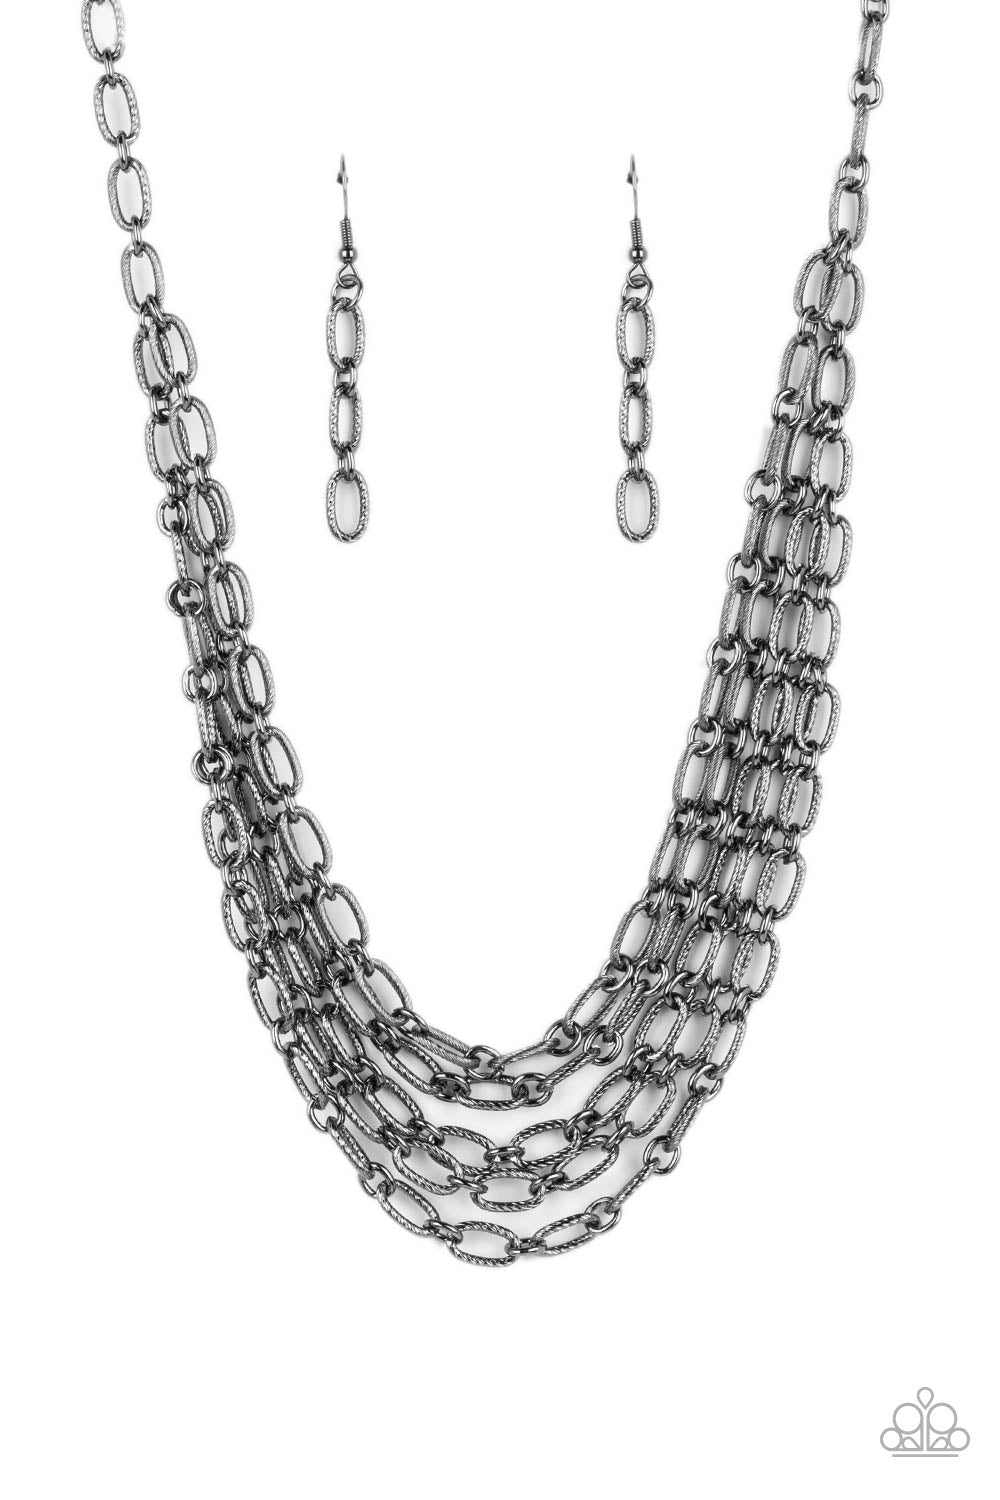 House of CHAIN - black - Paparazzi necklace